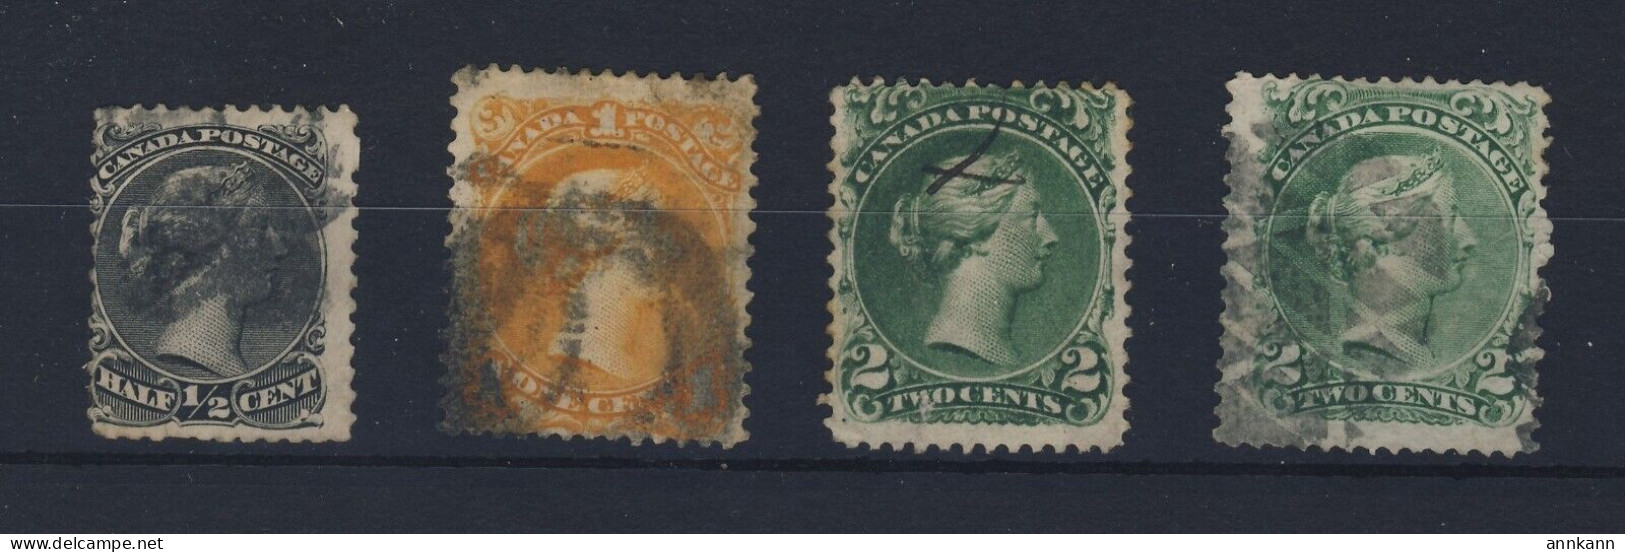 4x Canada Large Queen Used Stamps #21-1/2c #23-1c 2x #24-2c Guide Value= $250.00 - Usati